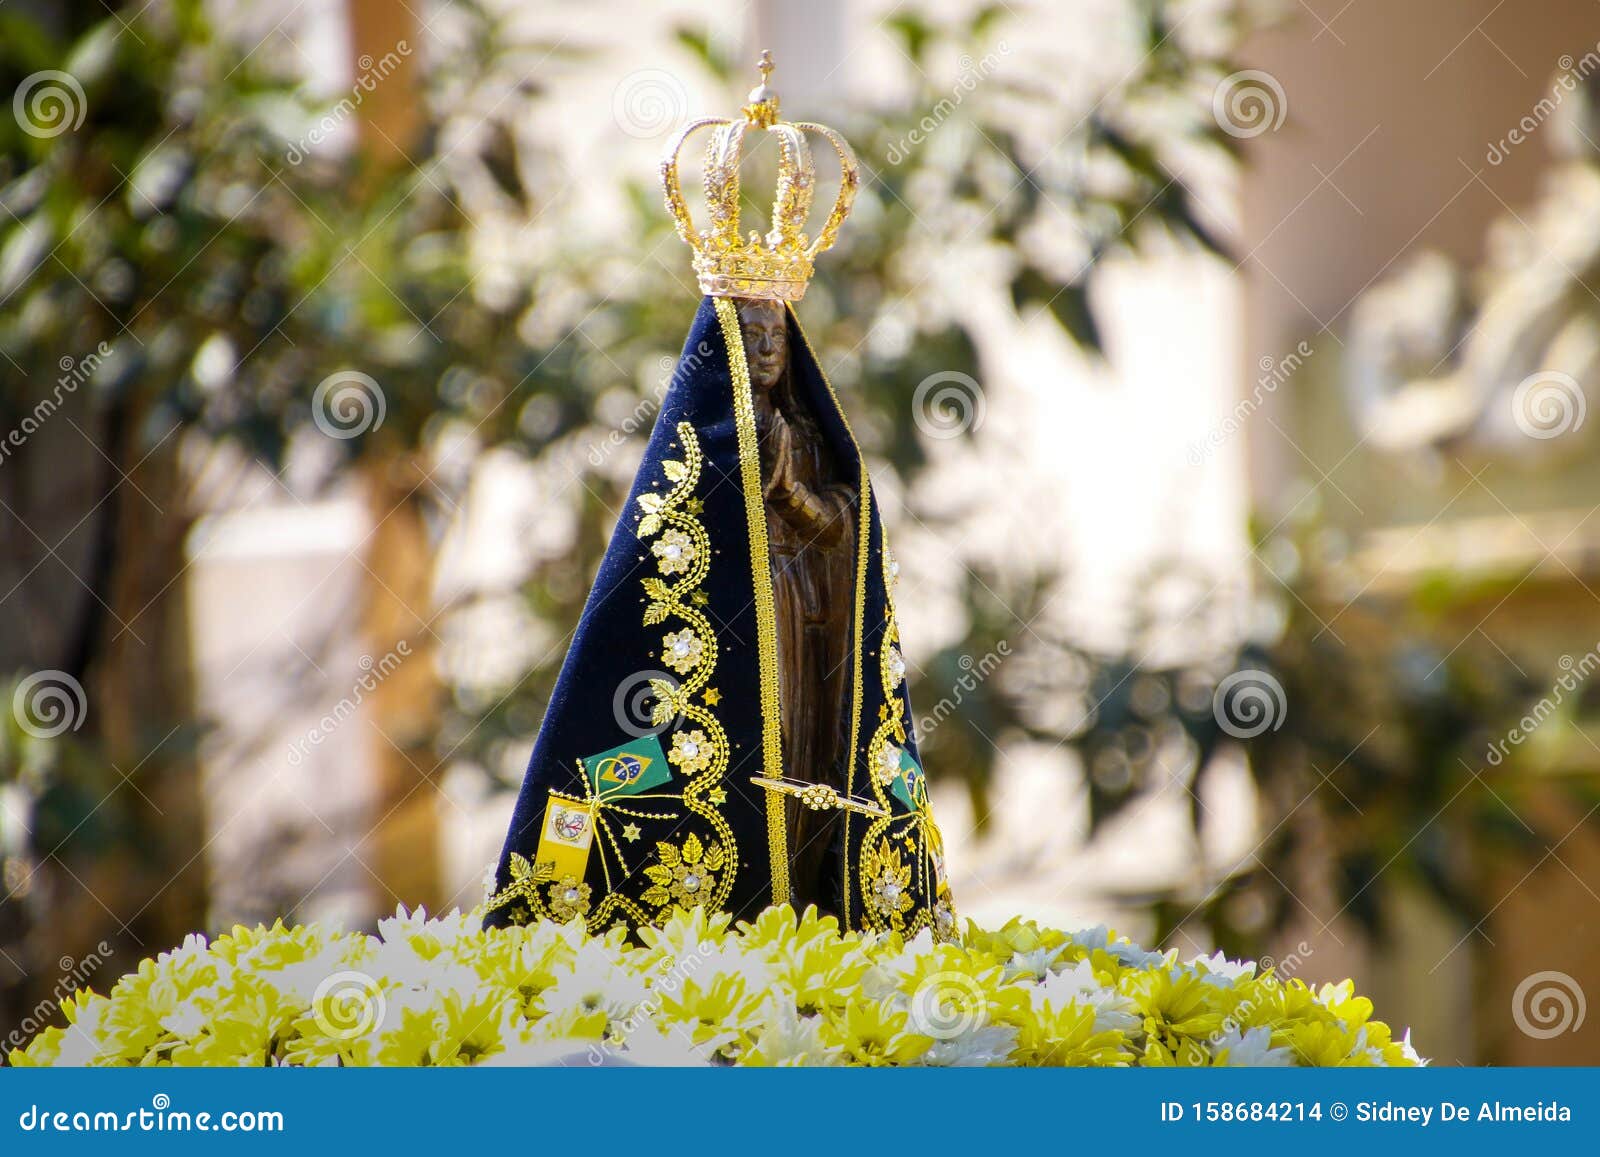 statue of the image of our lady of aparecida